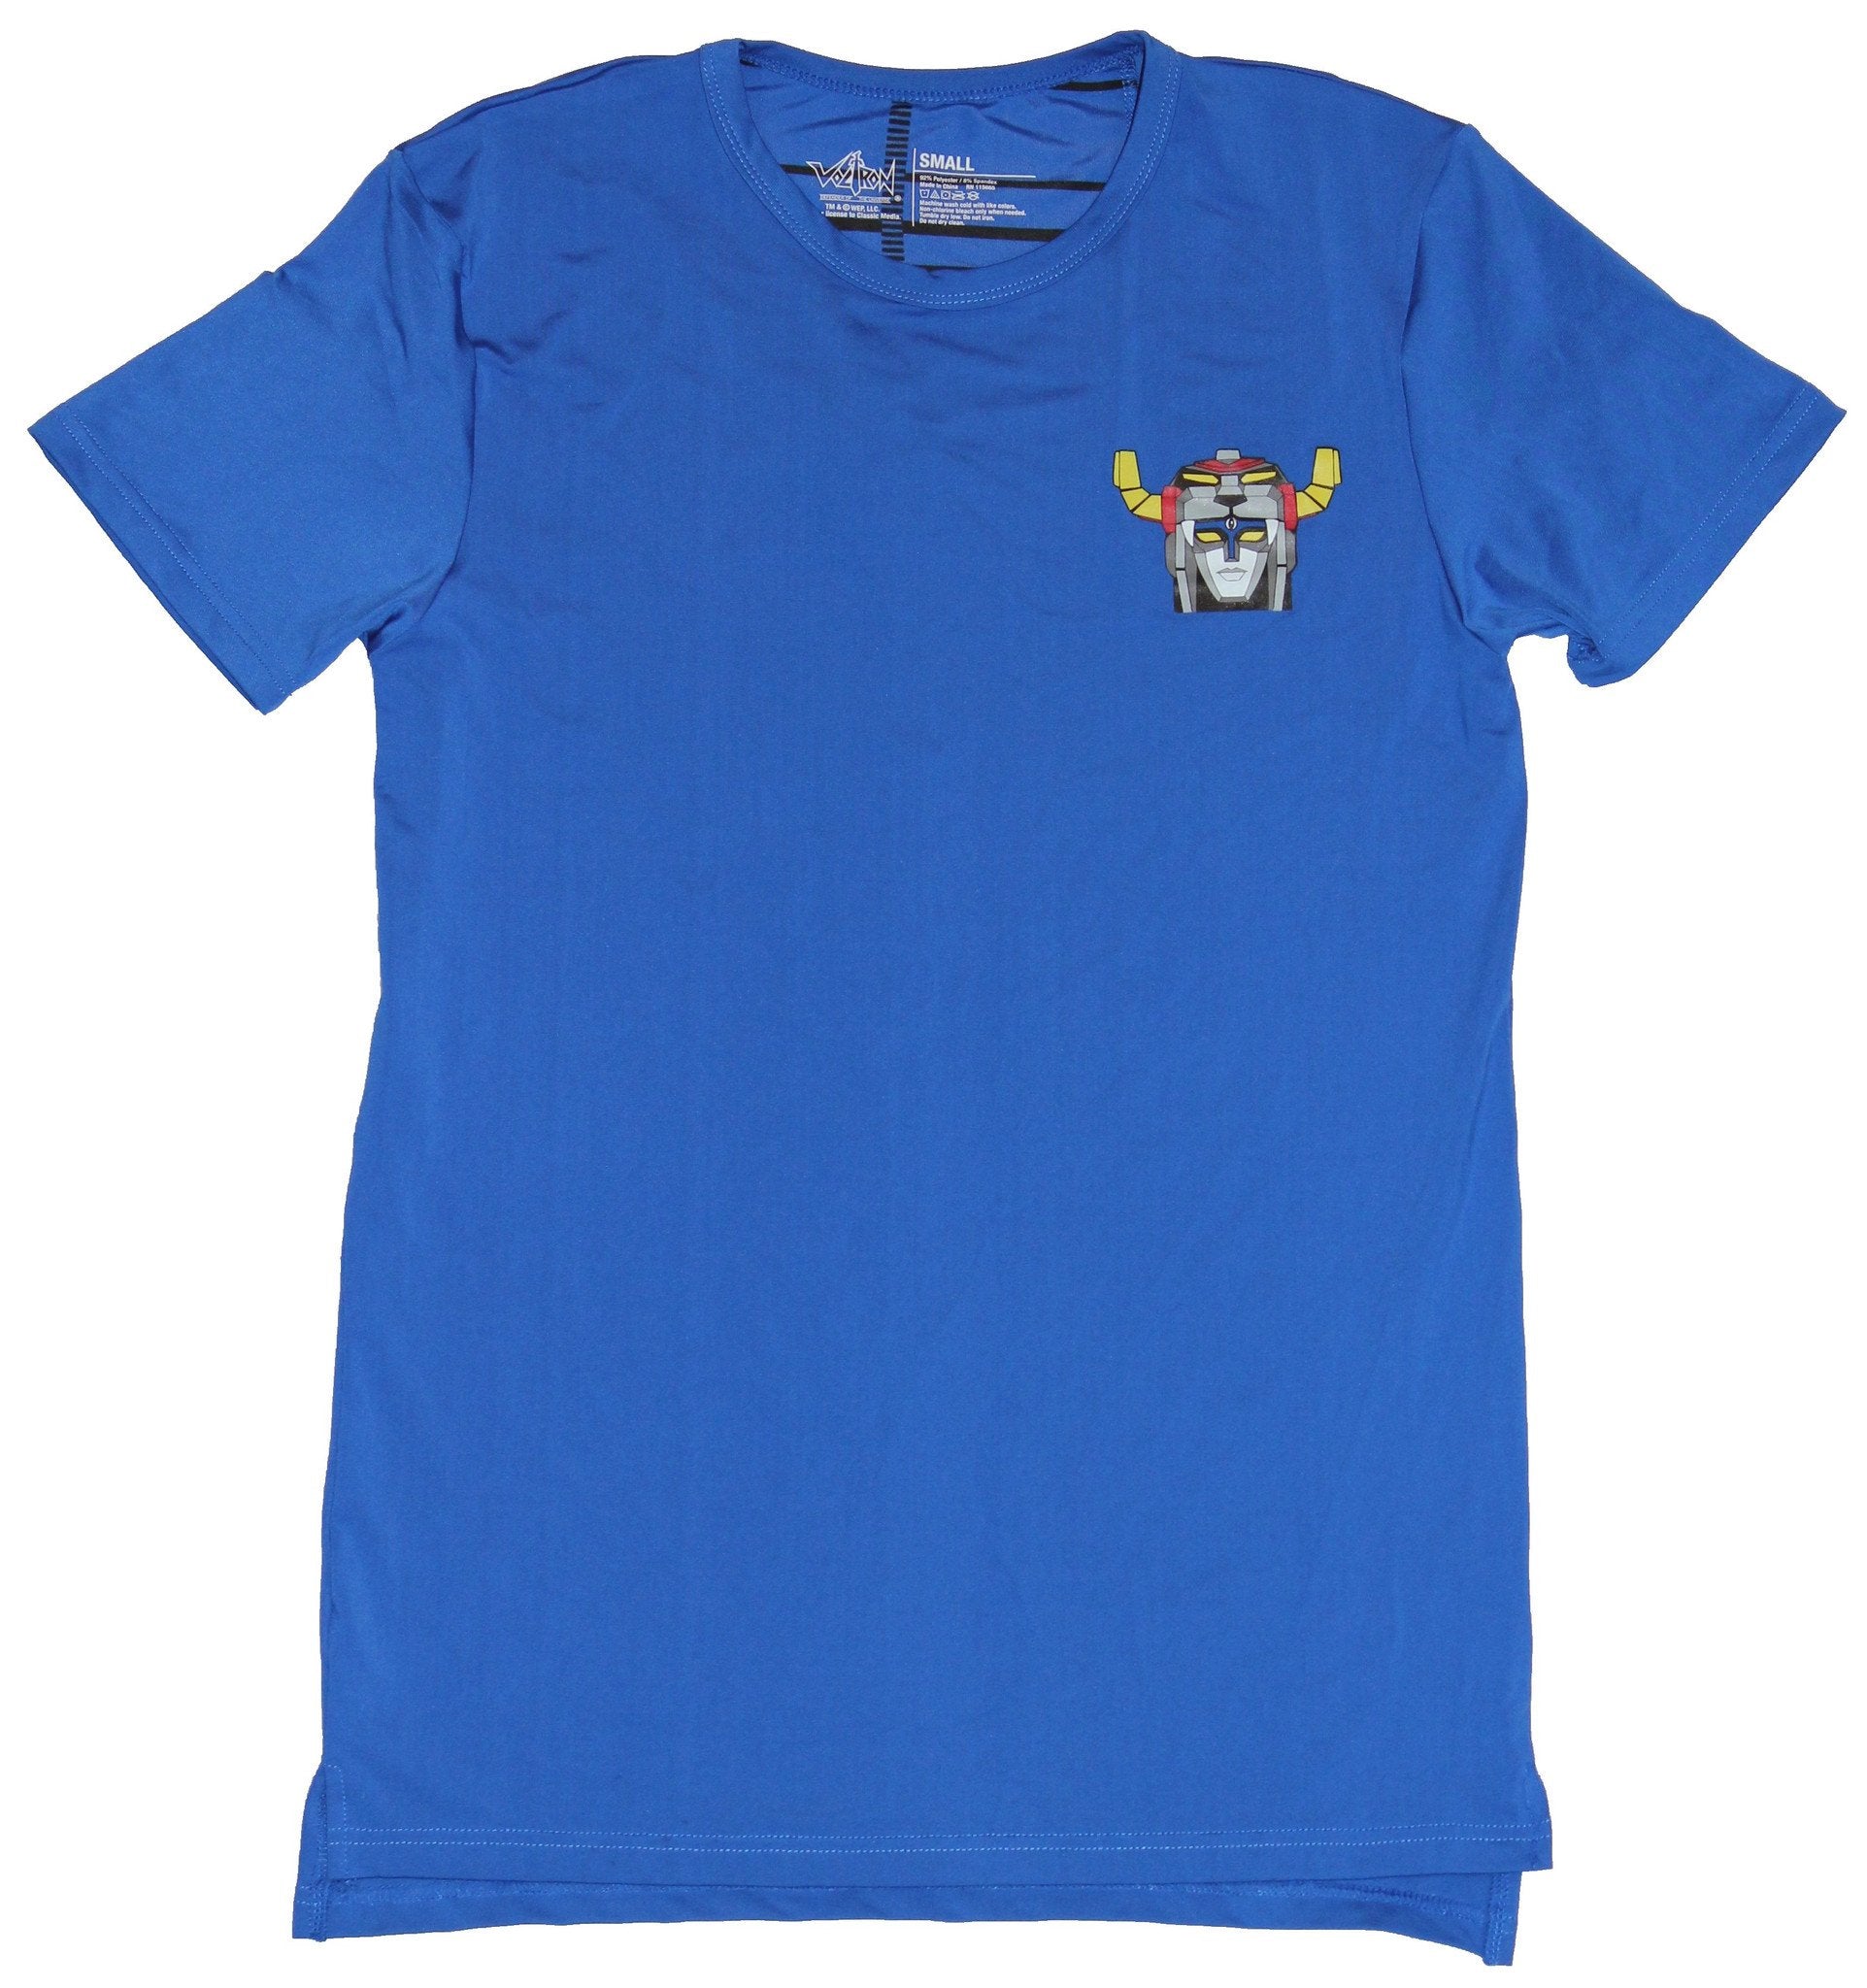 Voltron Mens Moisture Wicking T-Shirt - Simple Voltron Small Head Image